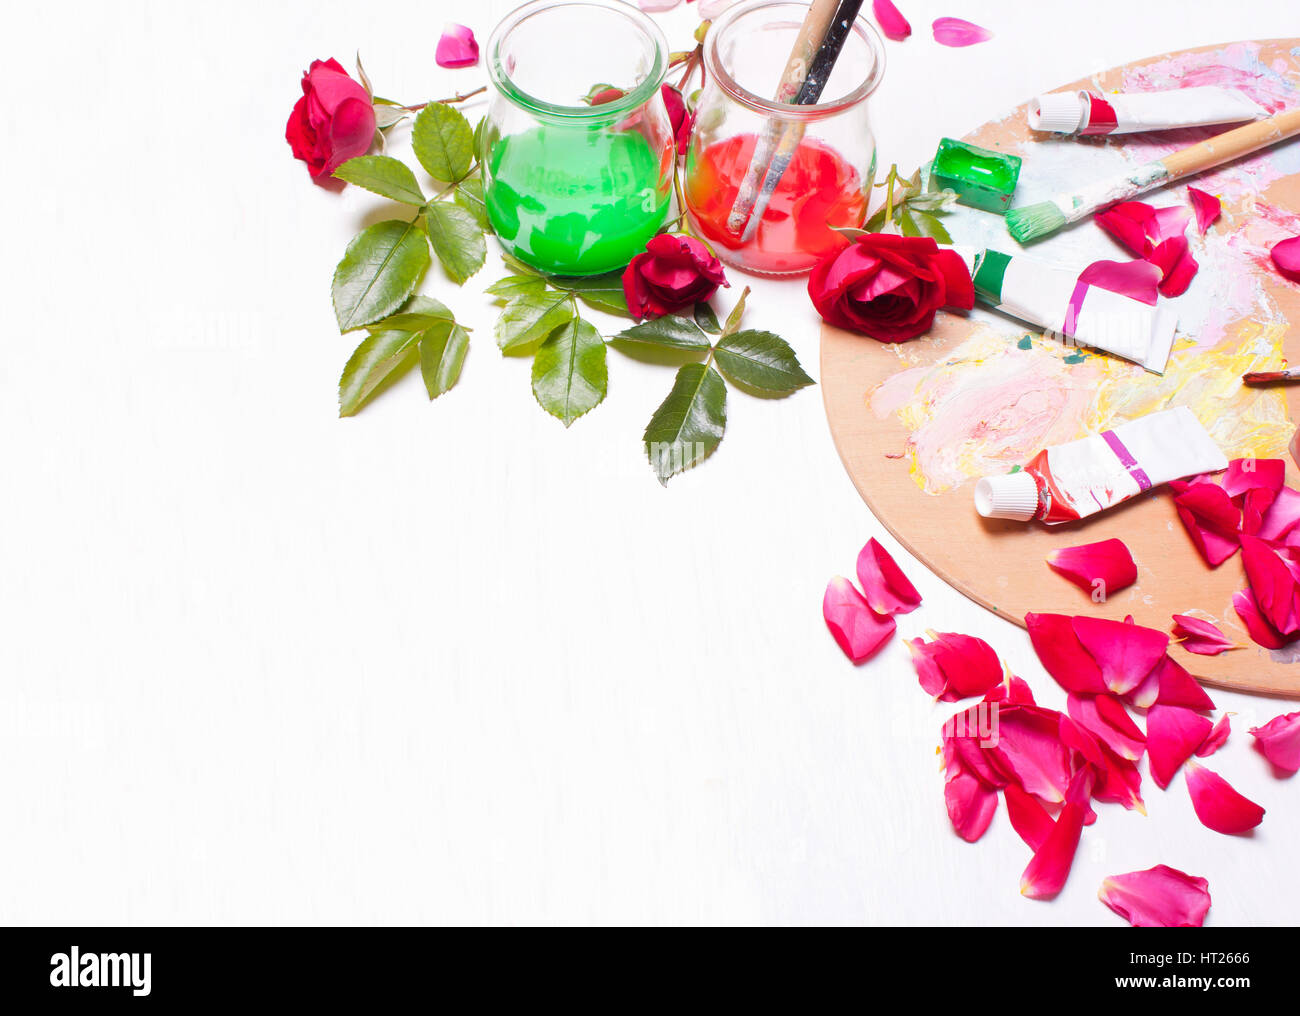 Paints and brushes with rose petals.Workplace of artist,designer.Concept art, creative.Top view background. Stock Photo